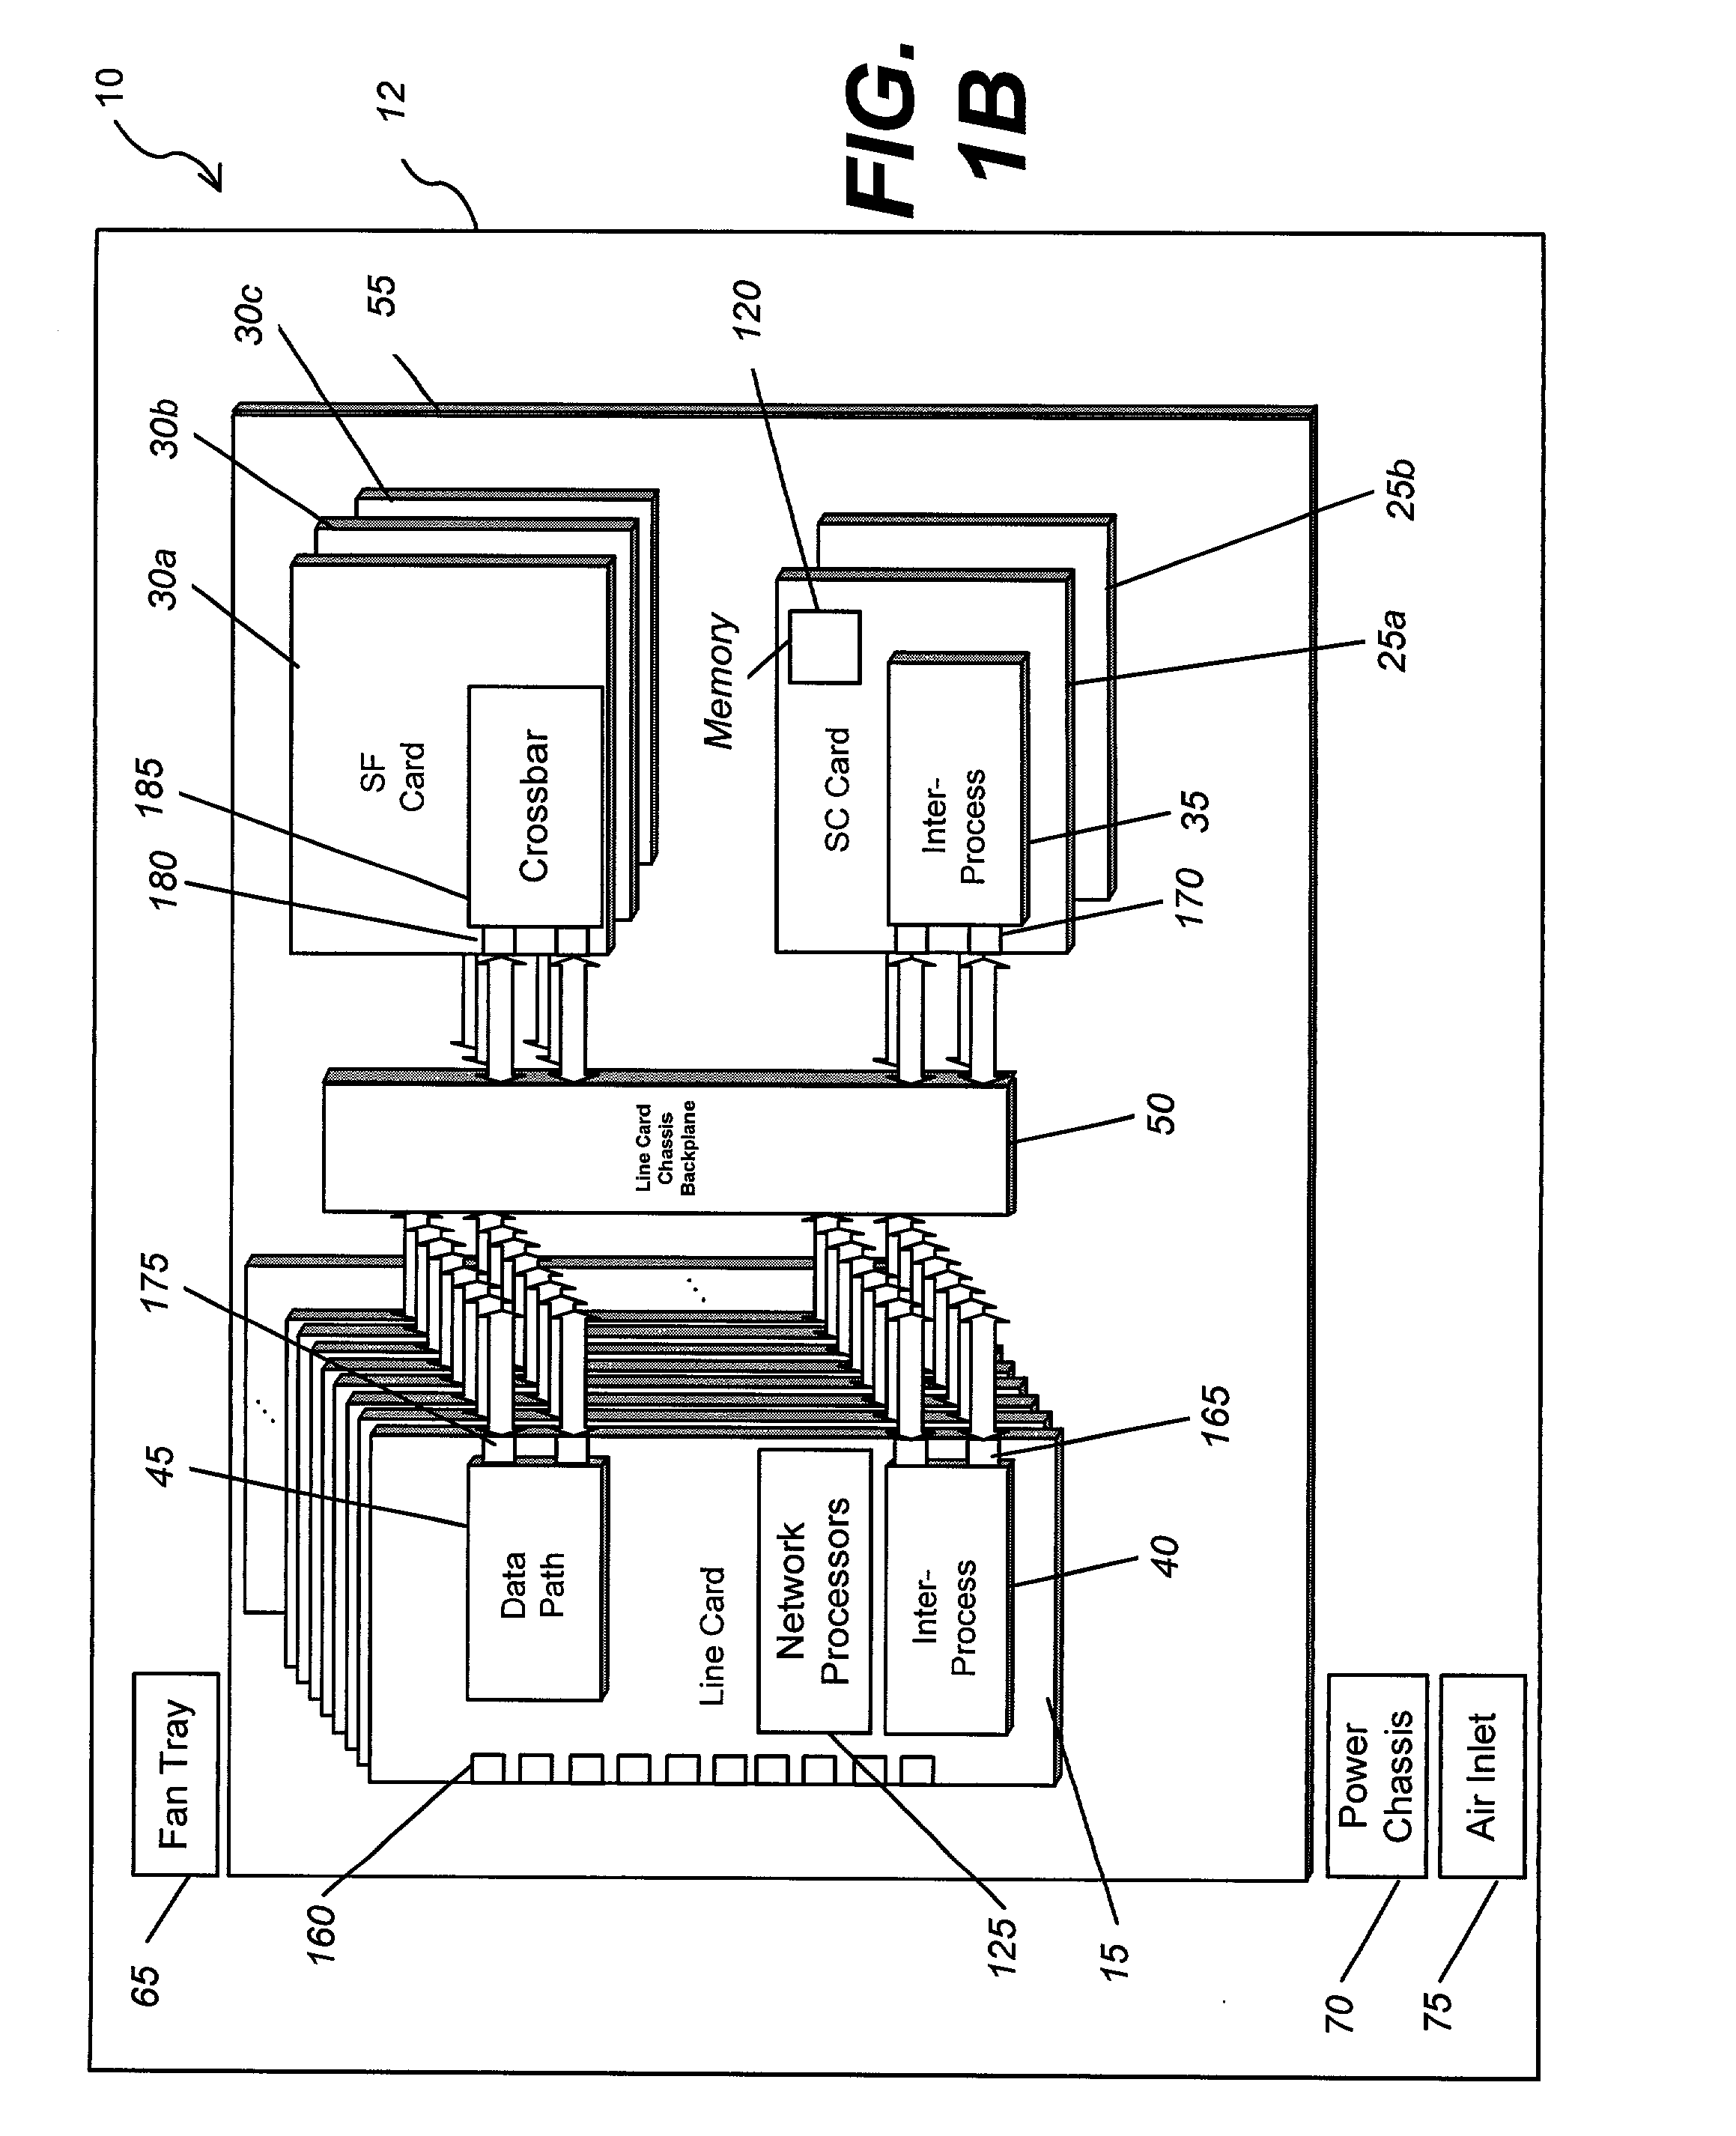 System and method for load-sharing computer network switch